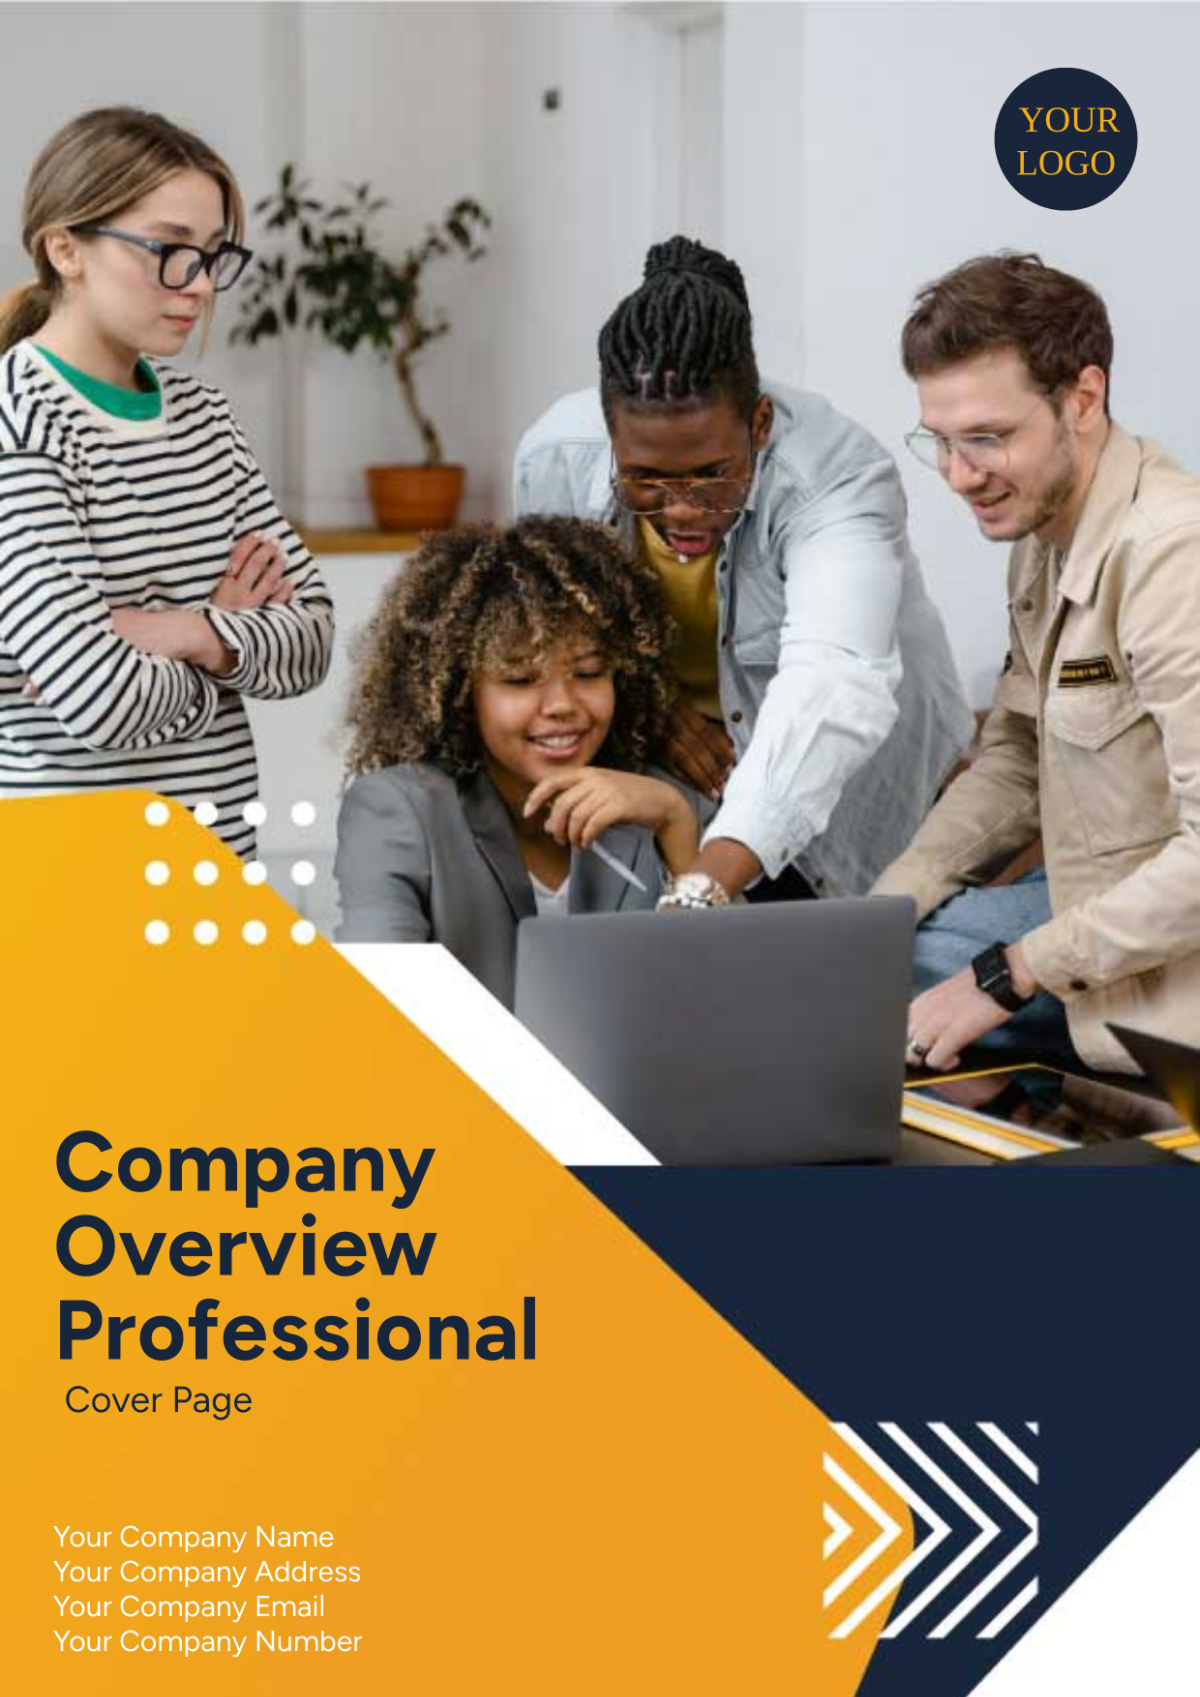 Company Overview Professional Cover Page